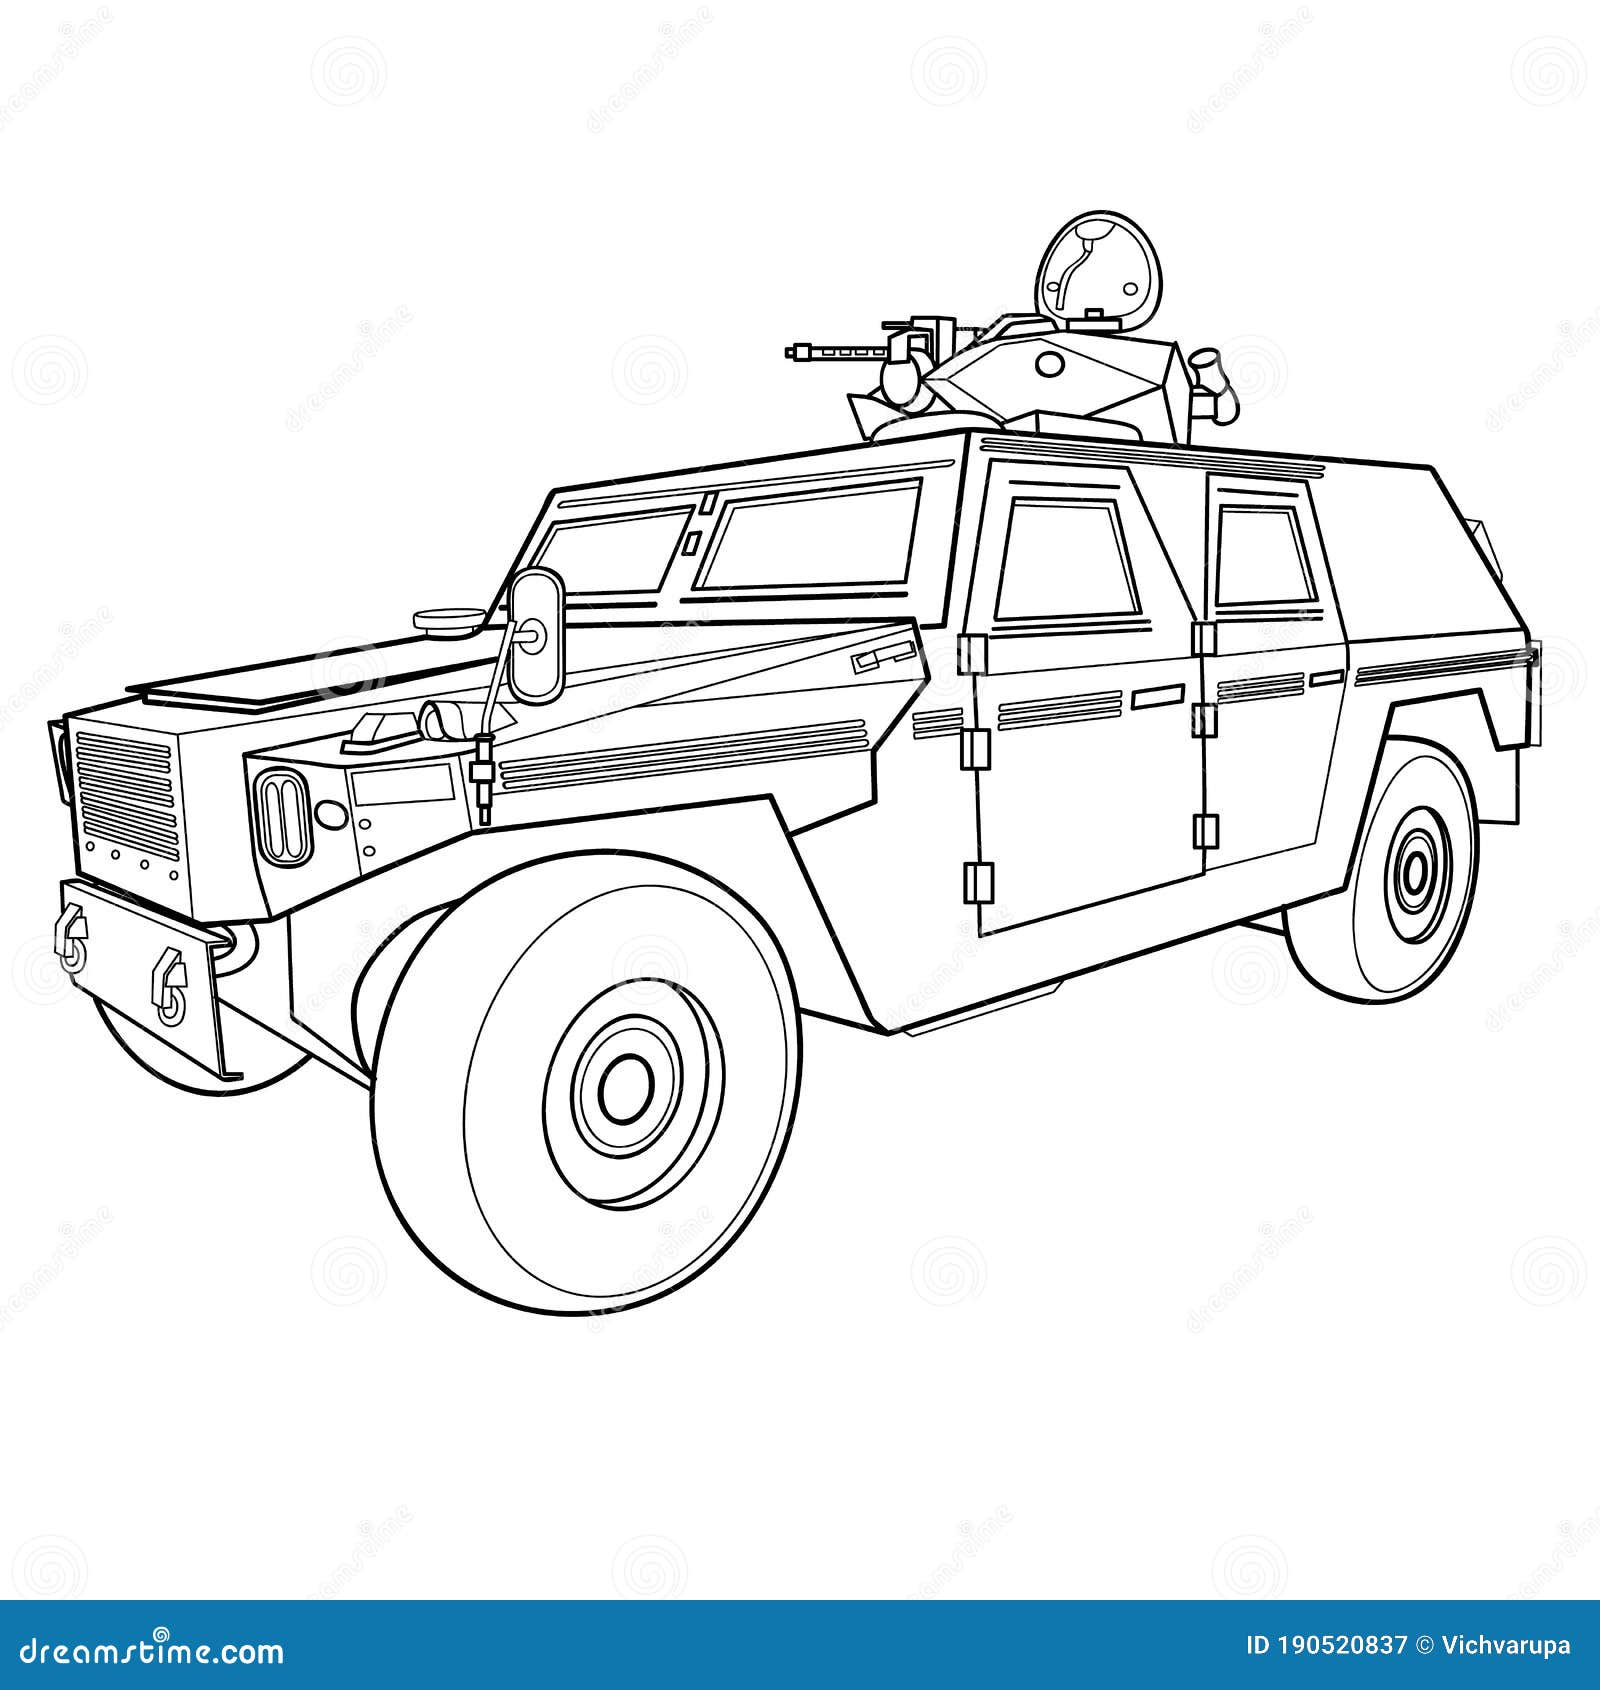 Car Sketch, Coloring, Isolated Object on a White Background, Vector ...